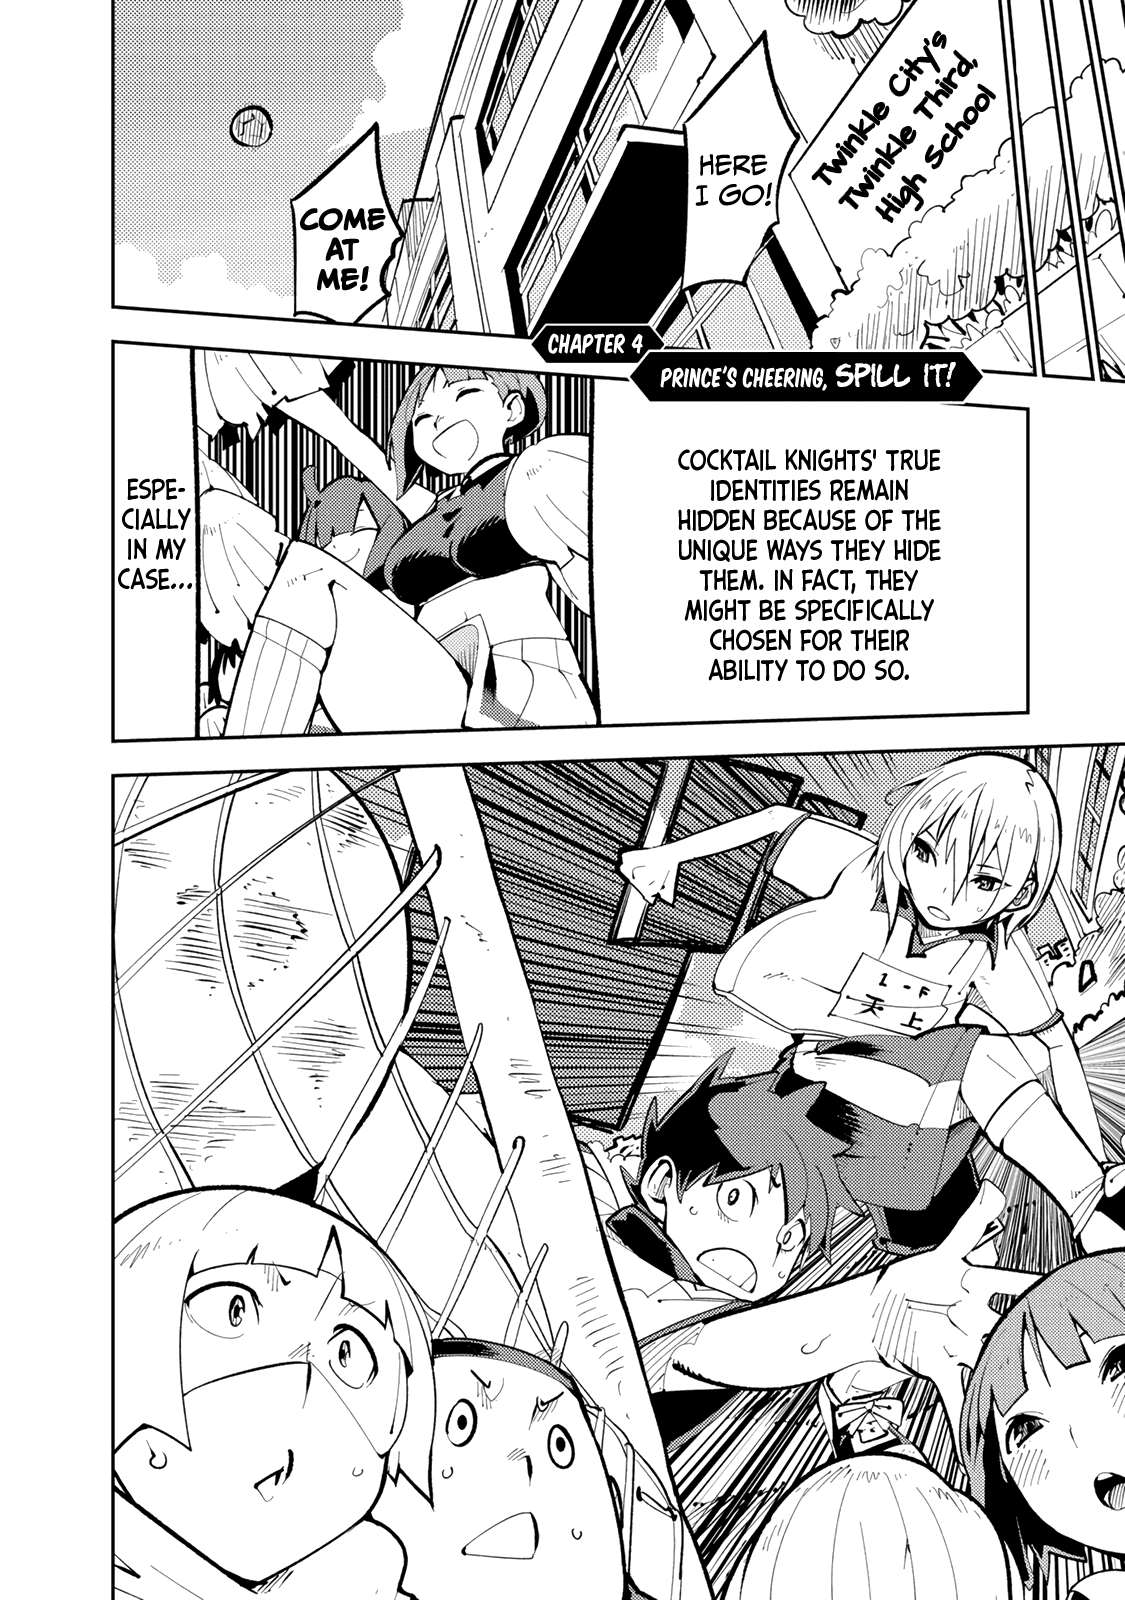 Spill It, Cocktail Knights! Chapter 4 #4